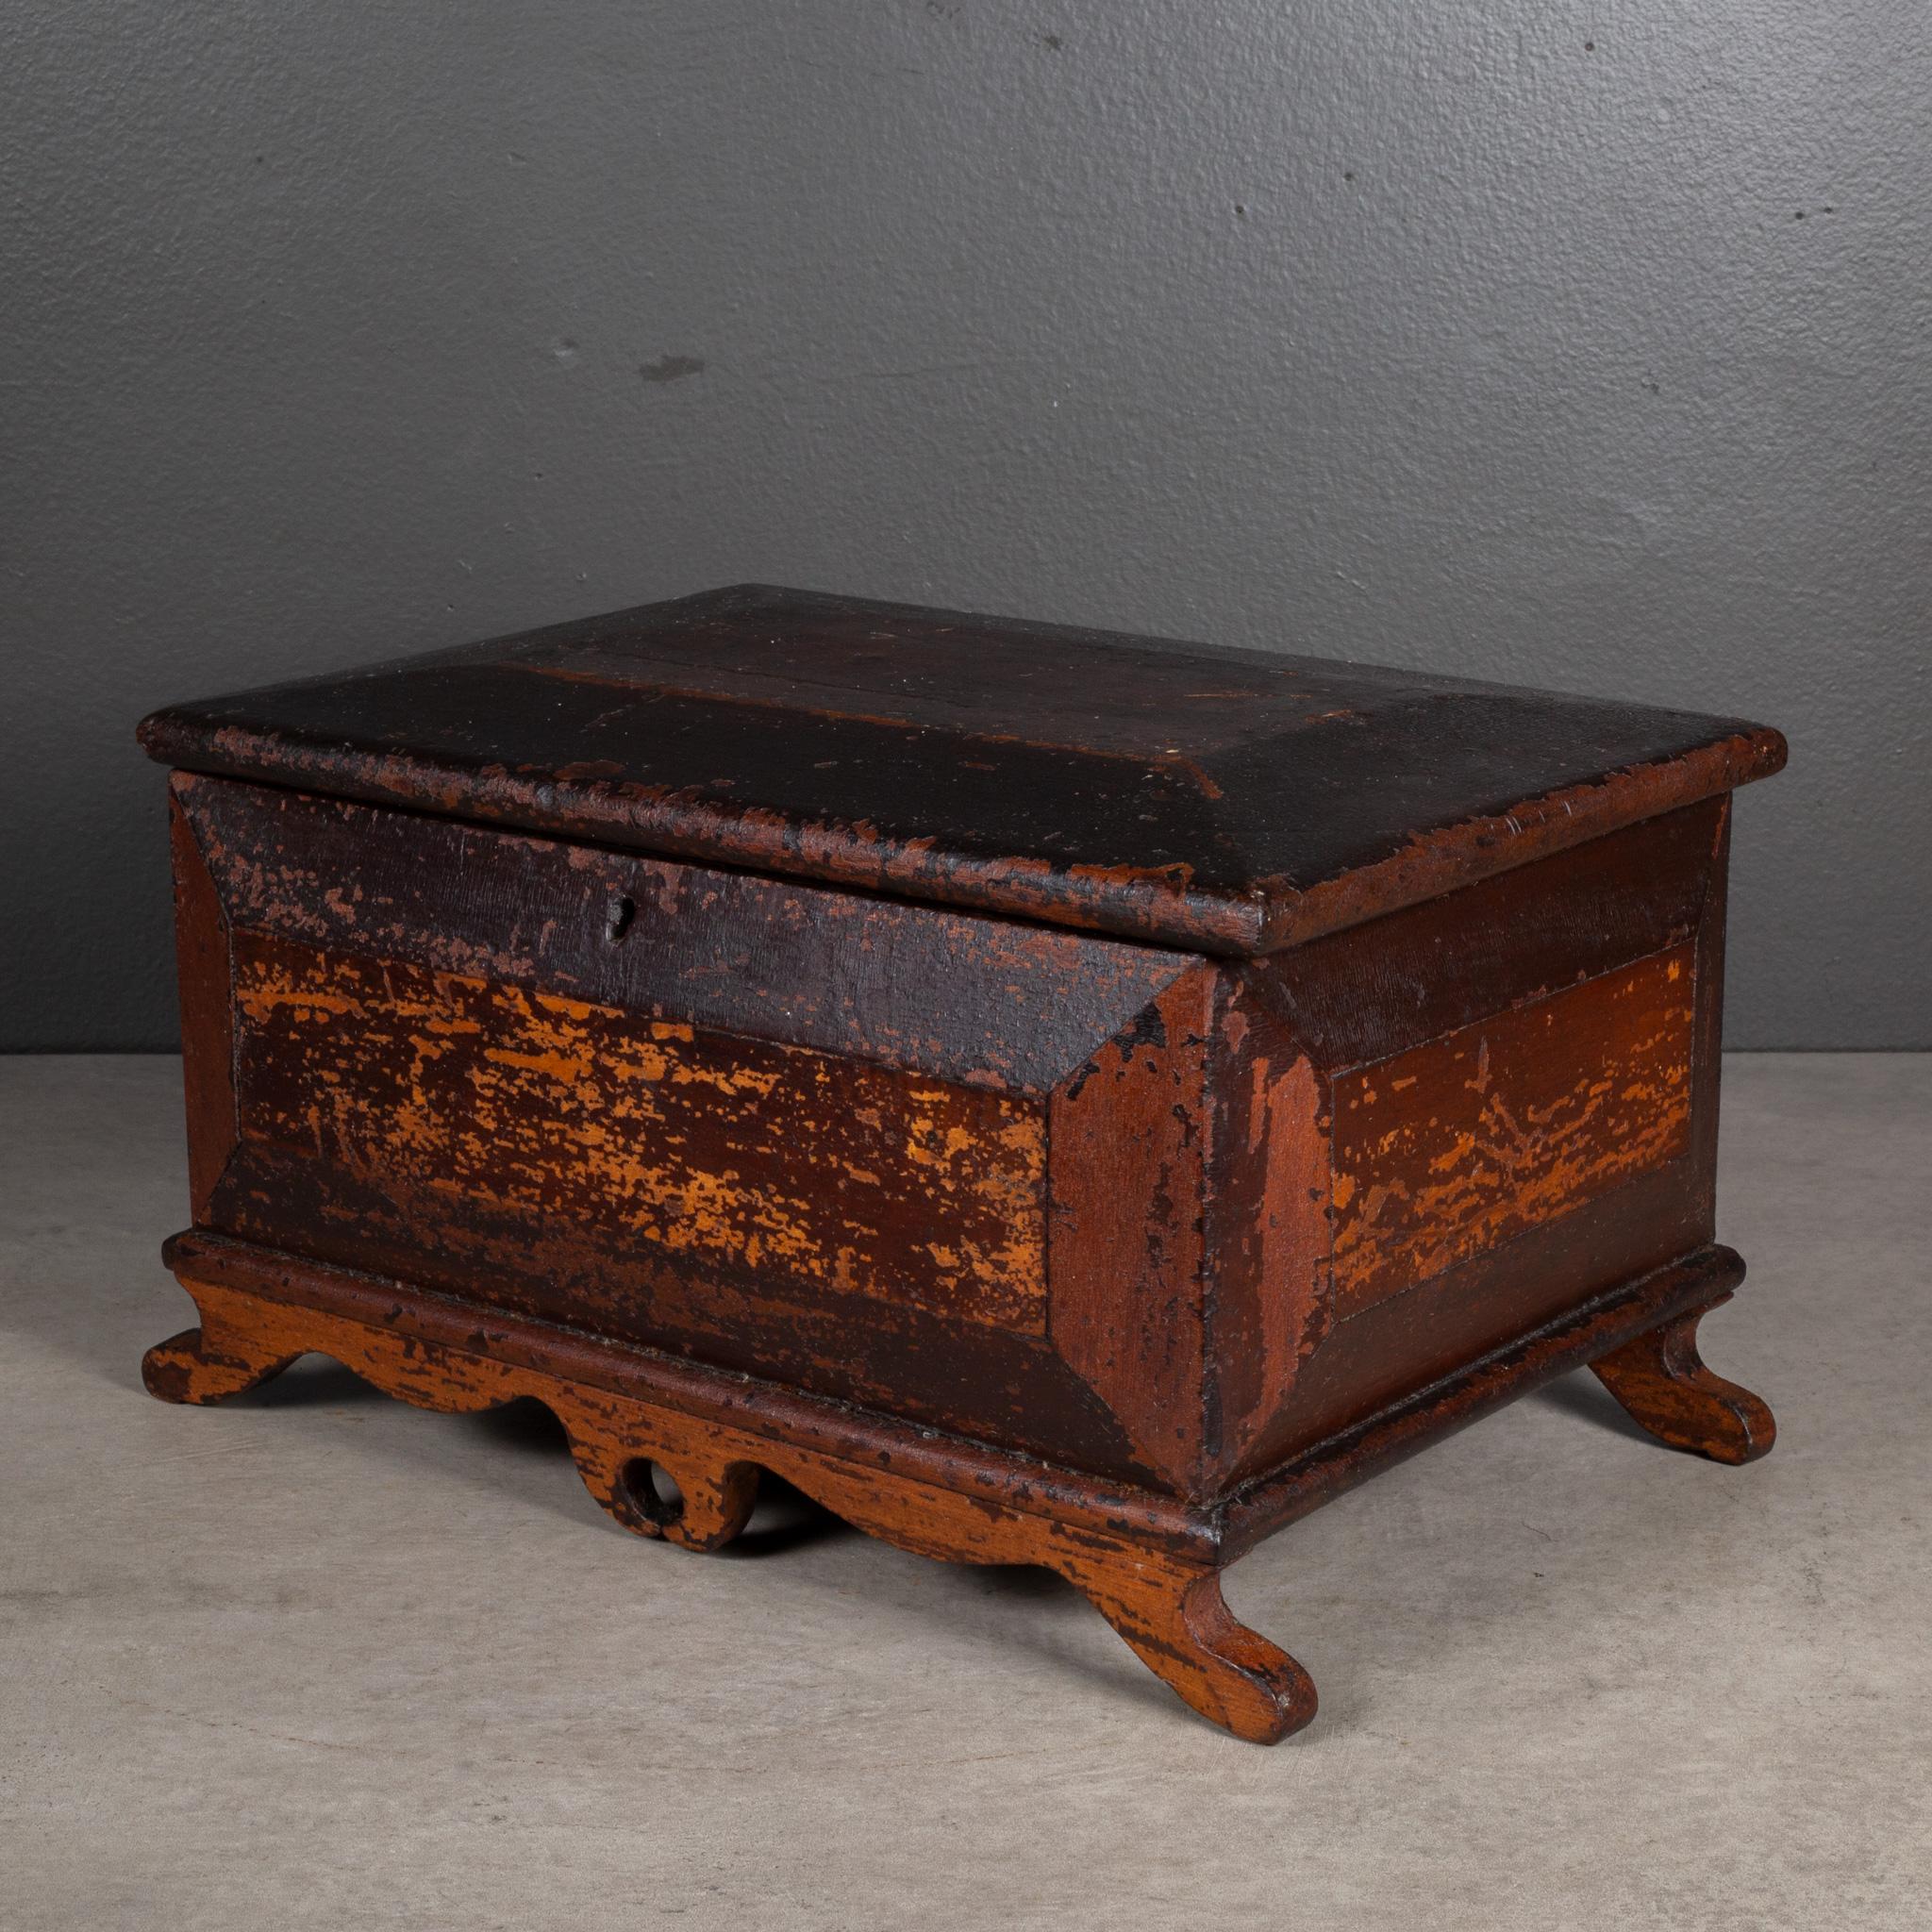 ABOUT

A 19th century distressed scroll-footed box with original velvet interior.

    CREATOR Unknown.
    DATE OF MANUFACTURE c.1800-1899. 
    MATERIALS AND TECHNIQUES Wood, Velvet. 
    CONDITION Good. Wear consistent with age and use. No key. 
